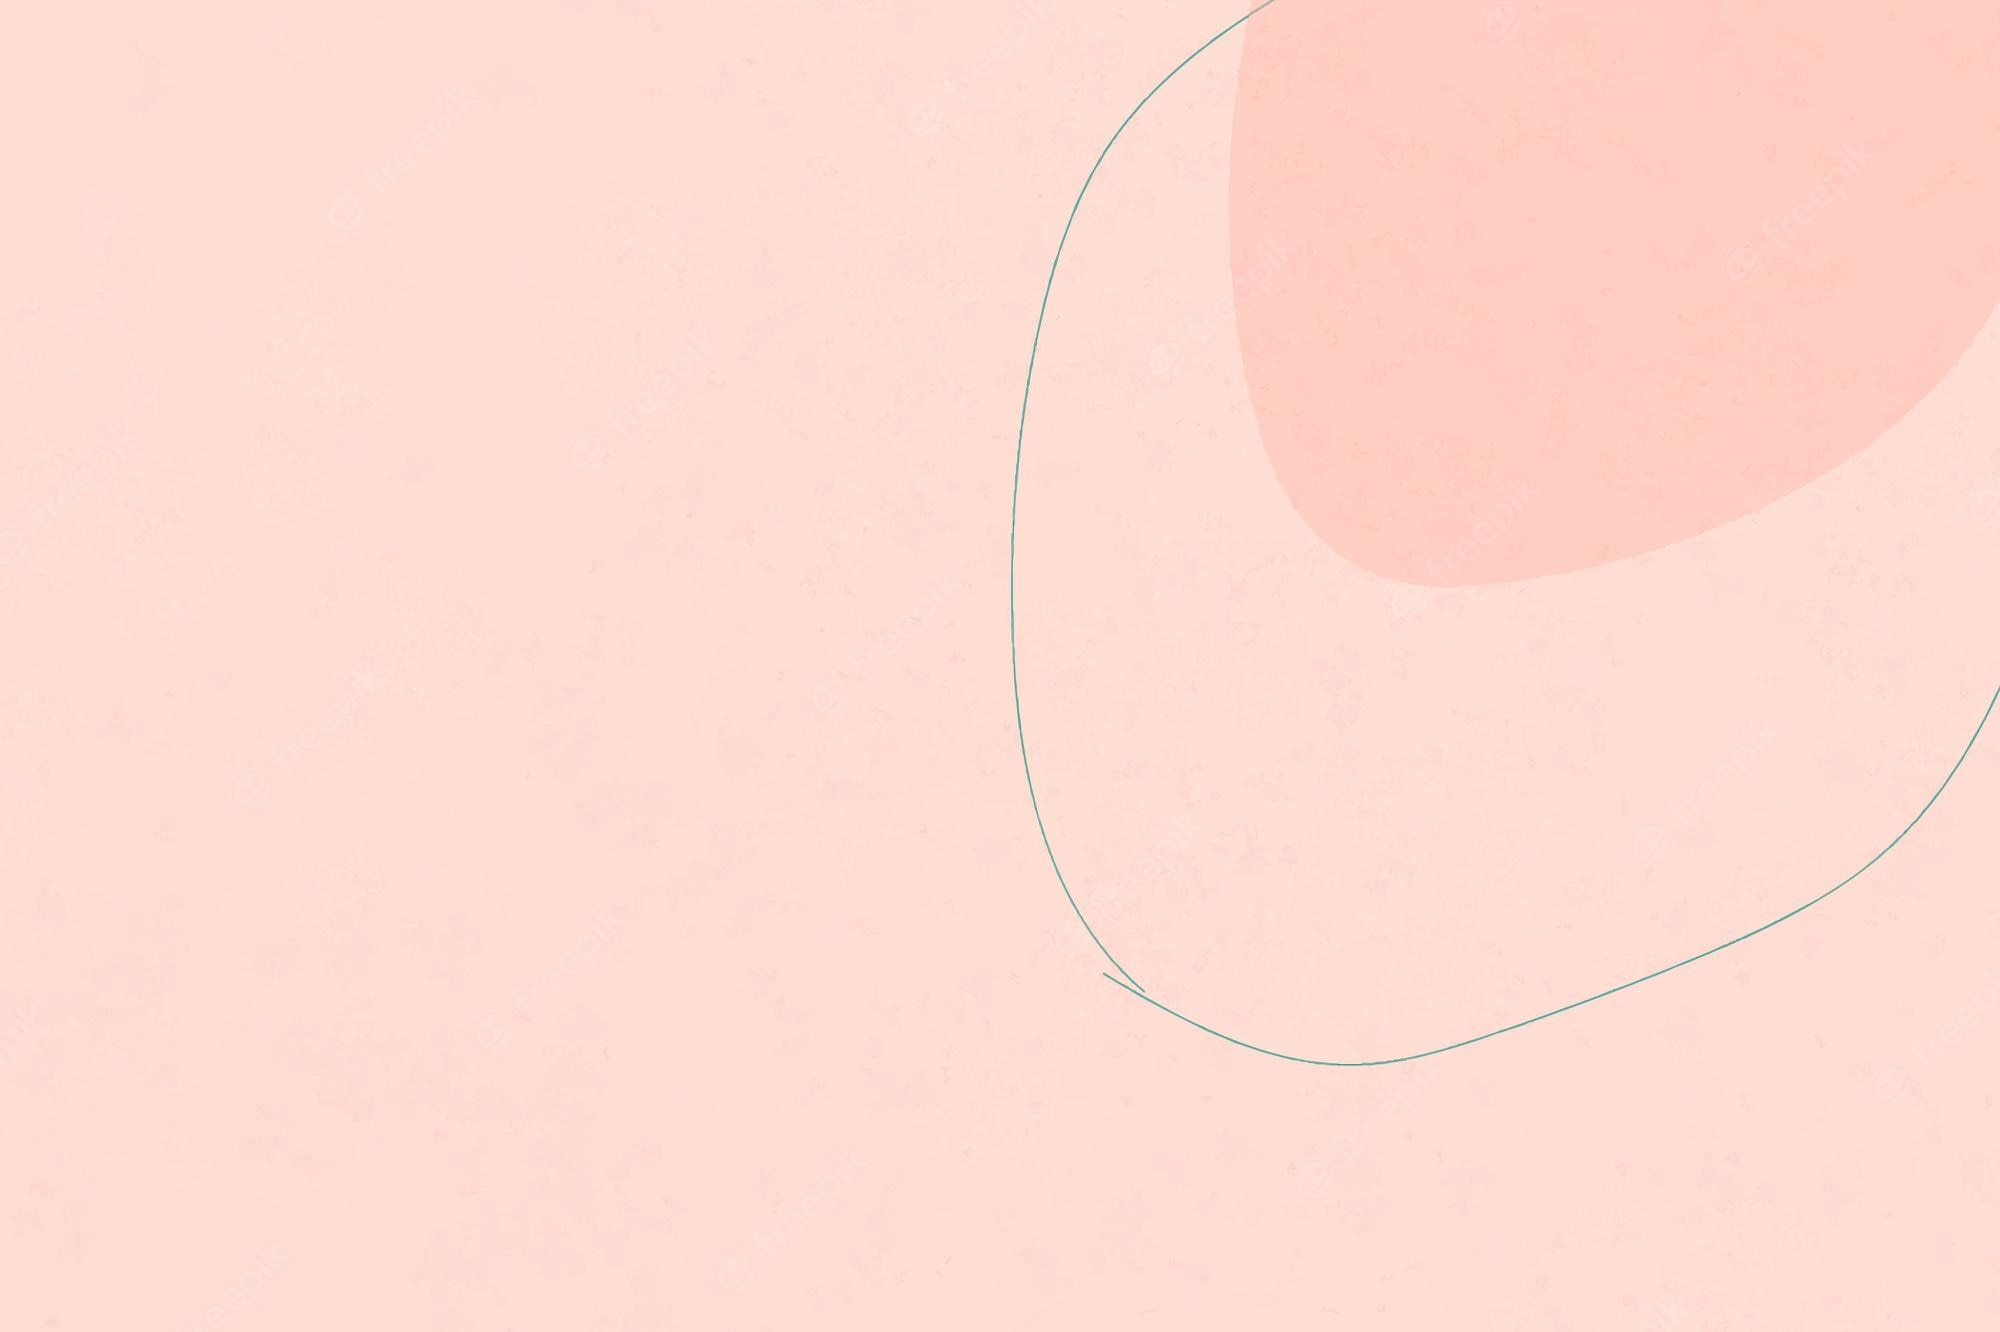 Salmon Pink Background Image. Free Vectors, & PSD